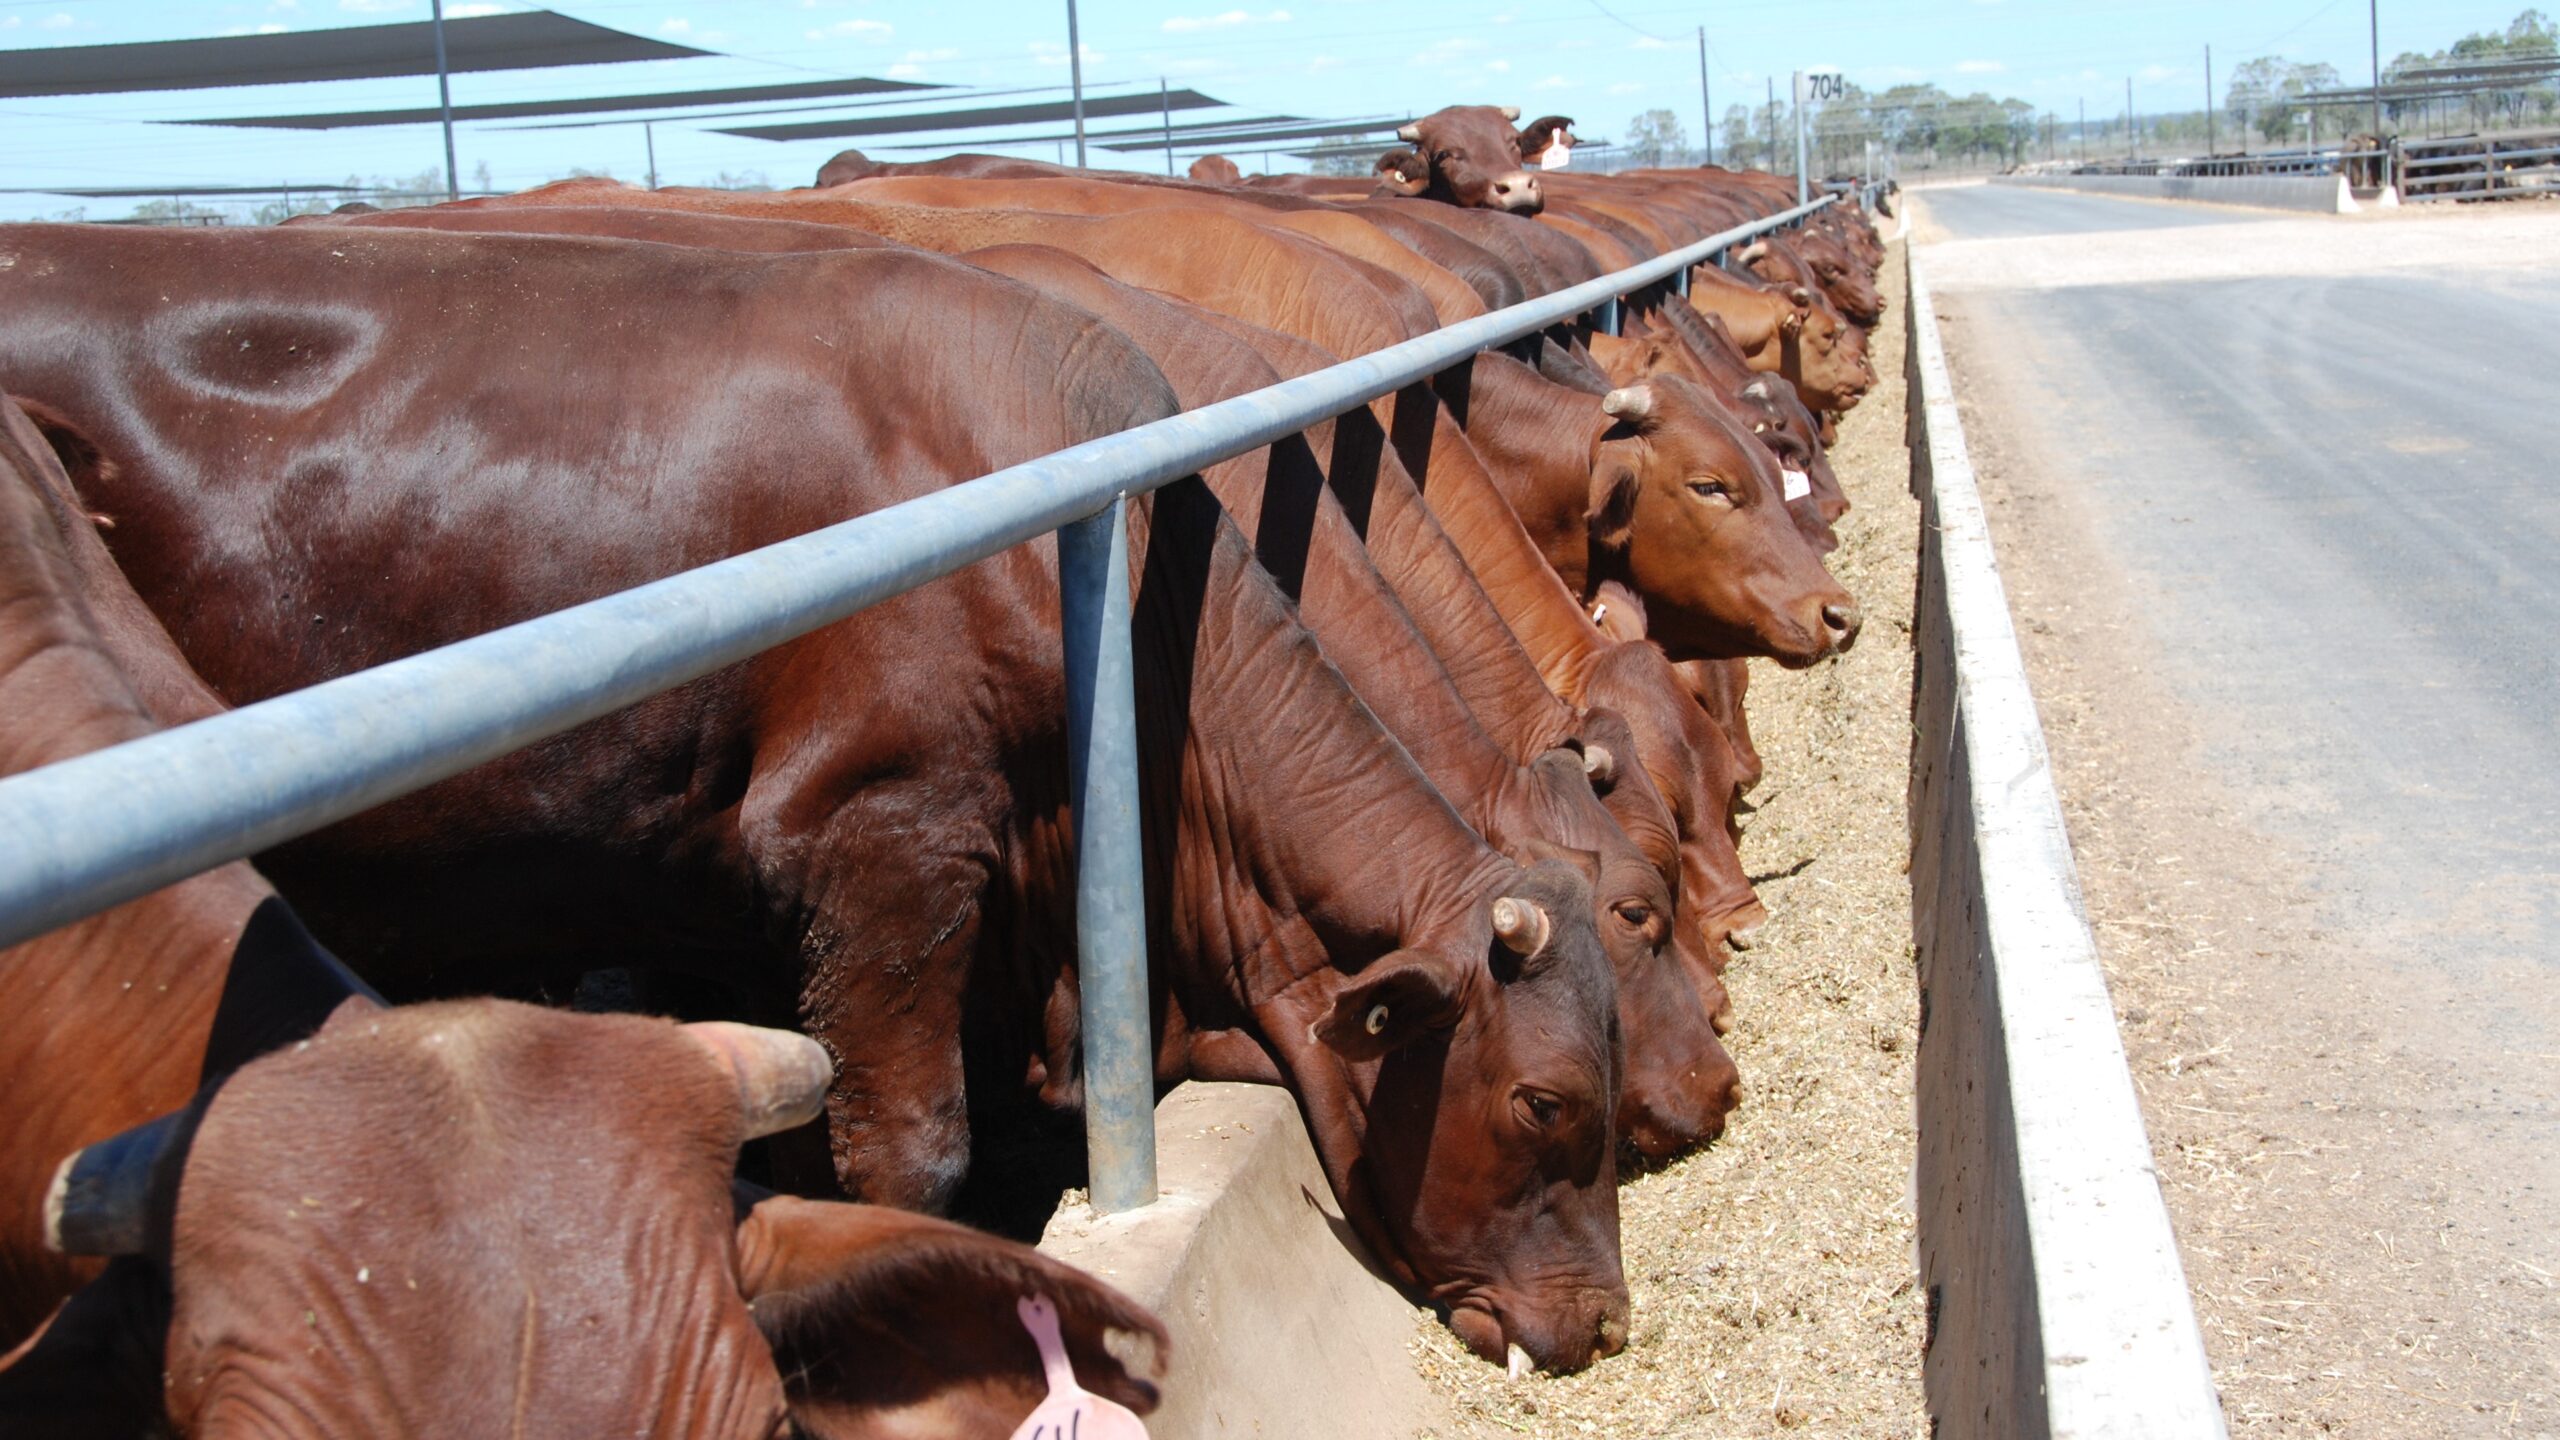 cattle at the feed bunk in feedlots